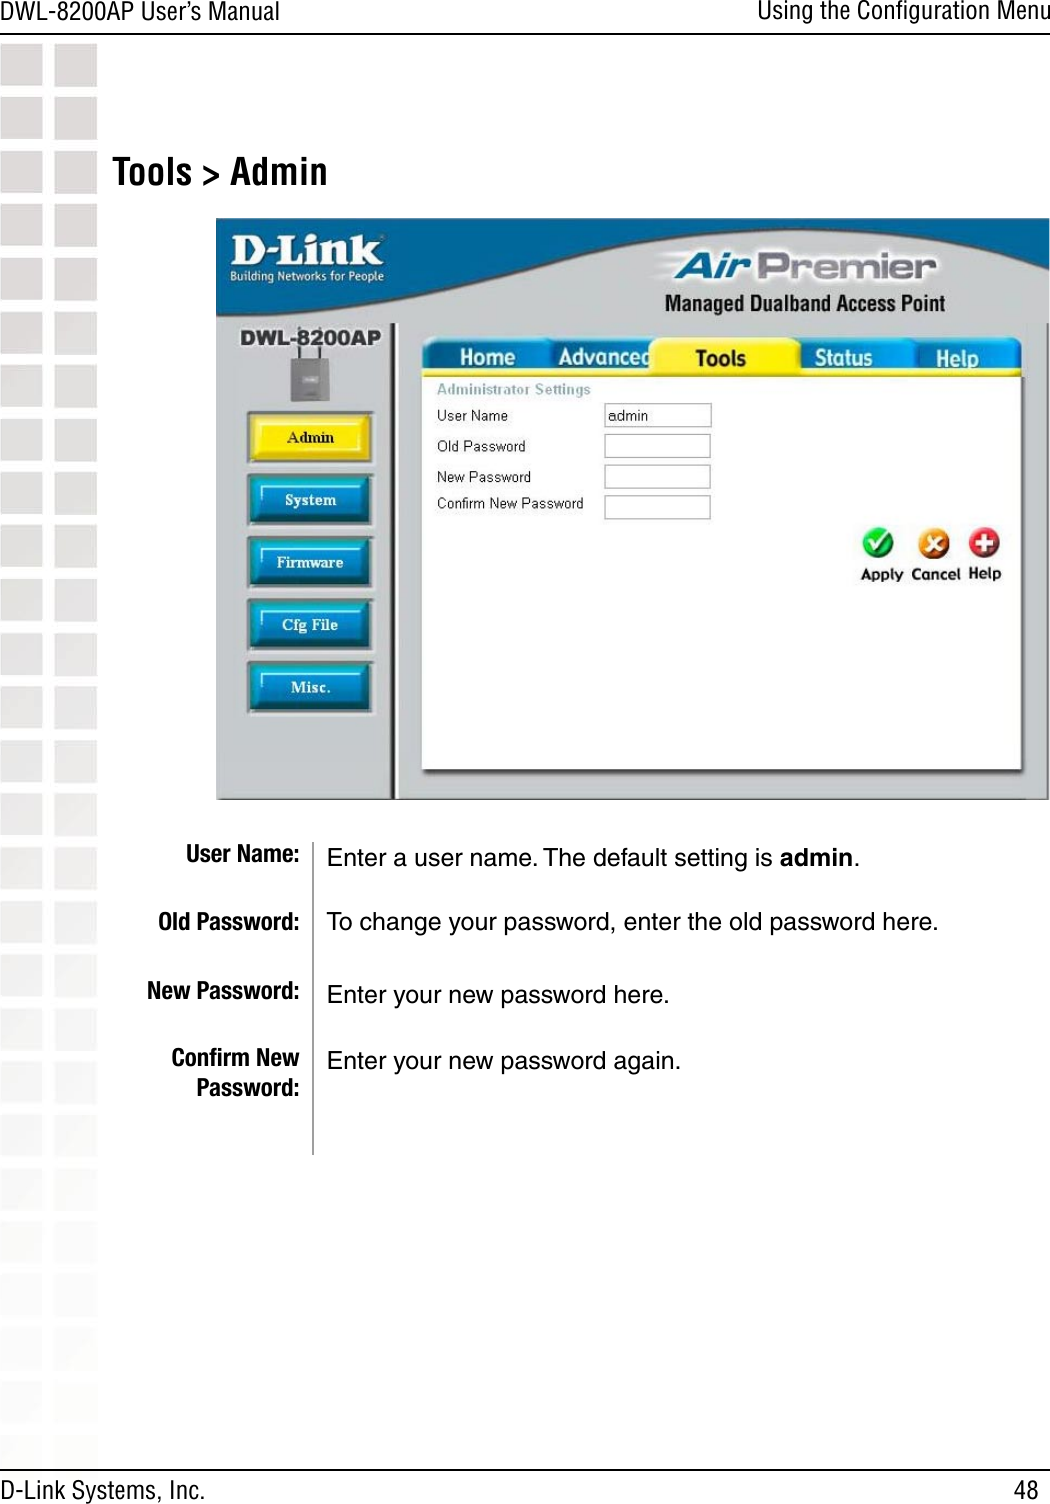 48DWL-8200AP User’s ManualD-Link Systems, Inc.Using the Conﬁguration MenuTools &gt; AdminUser Name:Old Password:New Password:Conﬁrm New Password:Enter a user name. The default setting is admin.To change your password, enter the old password here.Enter your new password here.Enter your new password again.